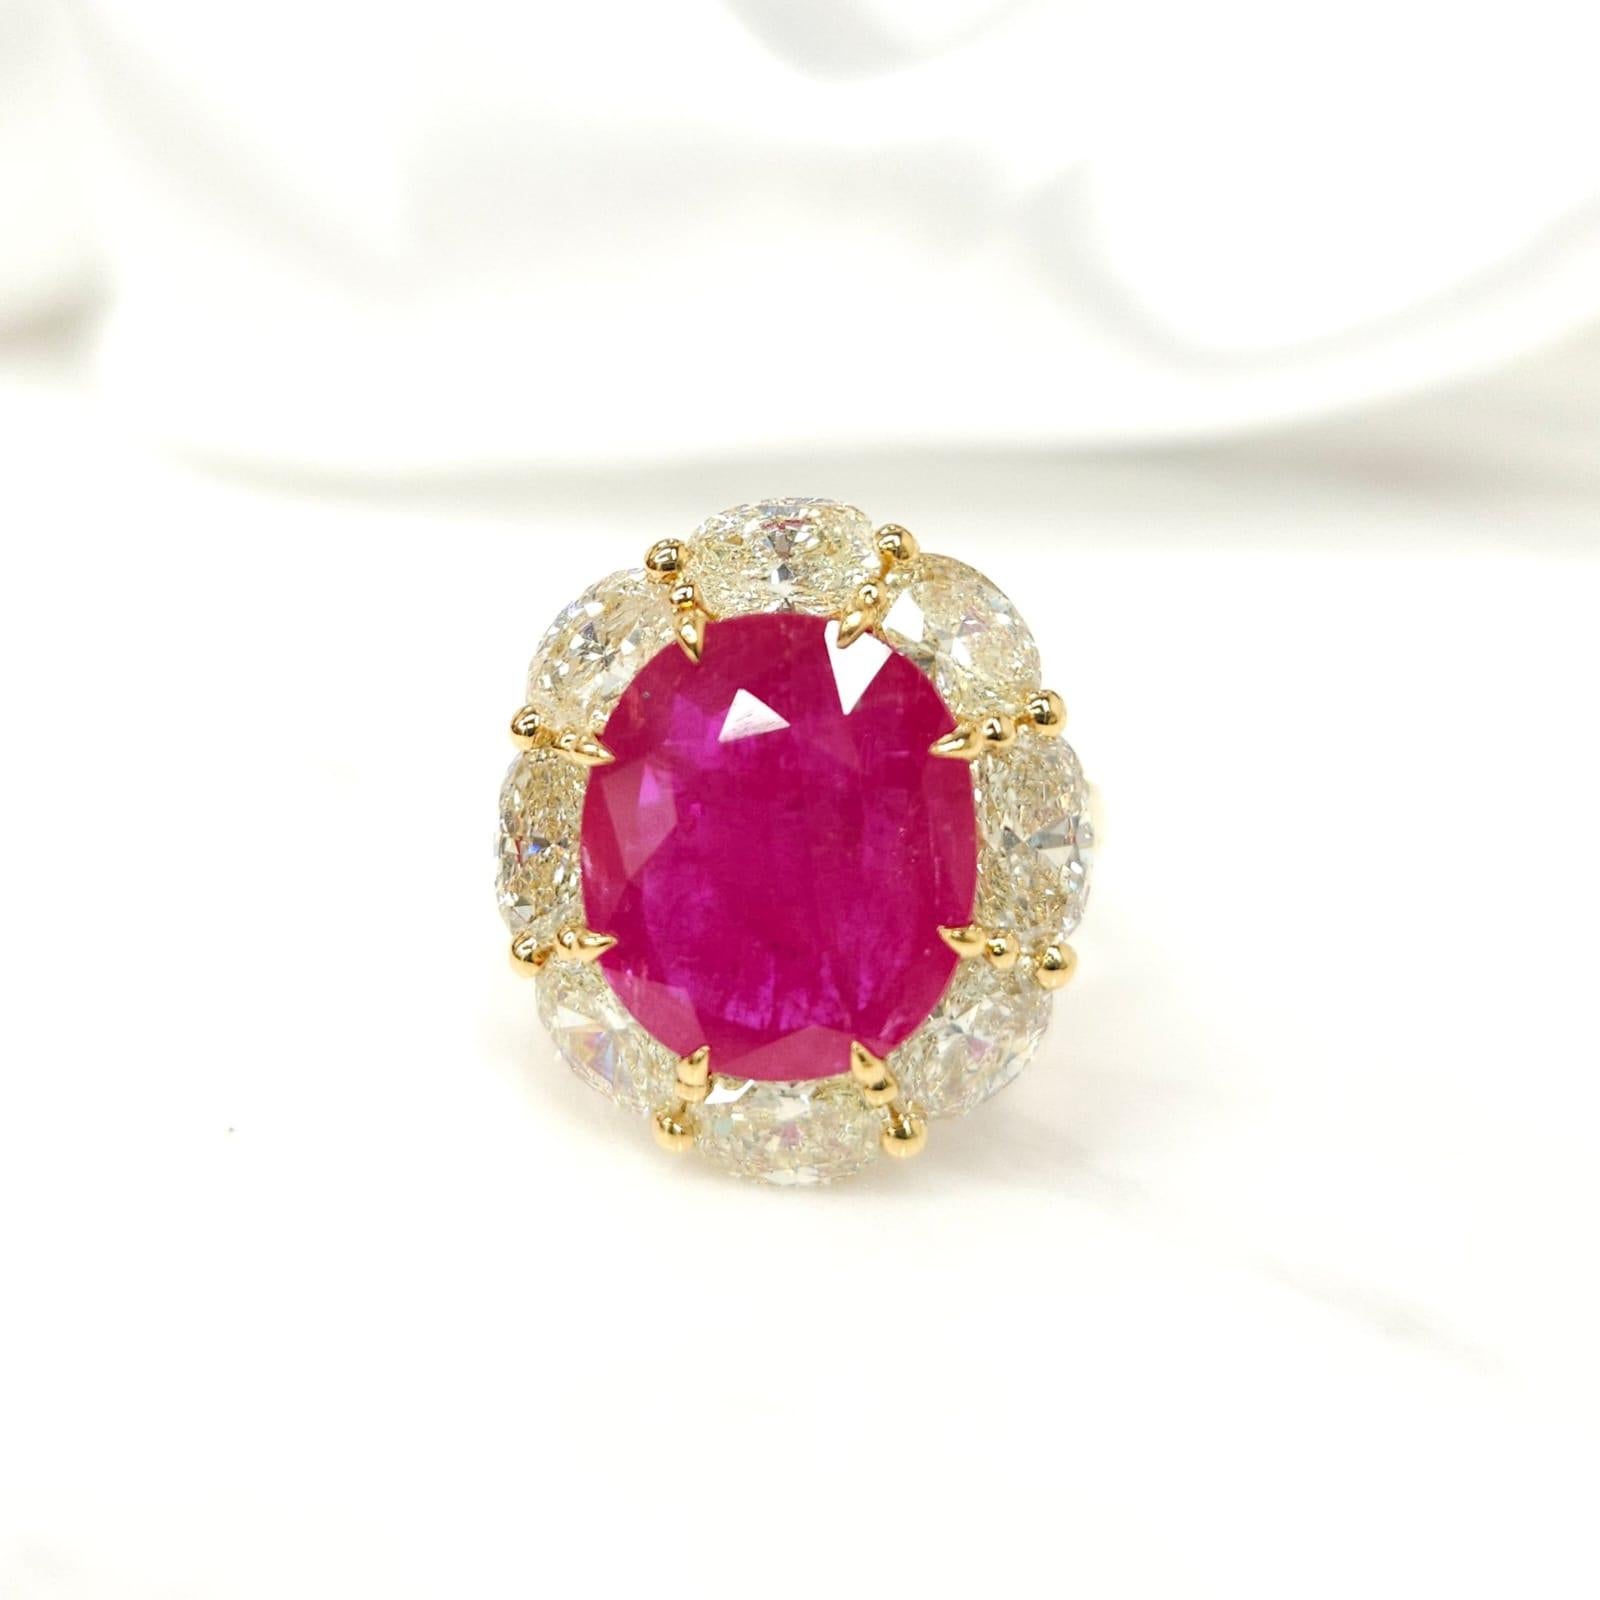 IGI Certified 6.53 Carat Ruby & 3.71 Carat Oval Diamond Ring in 18K Yellow Gold For Sale 11